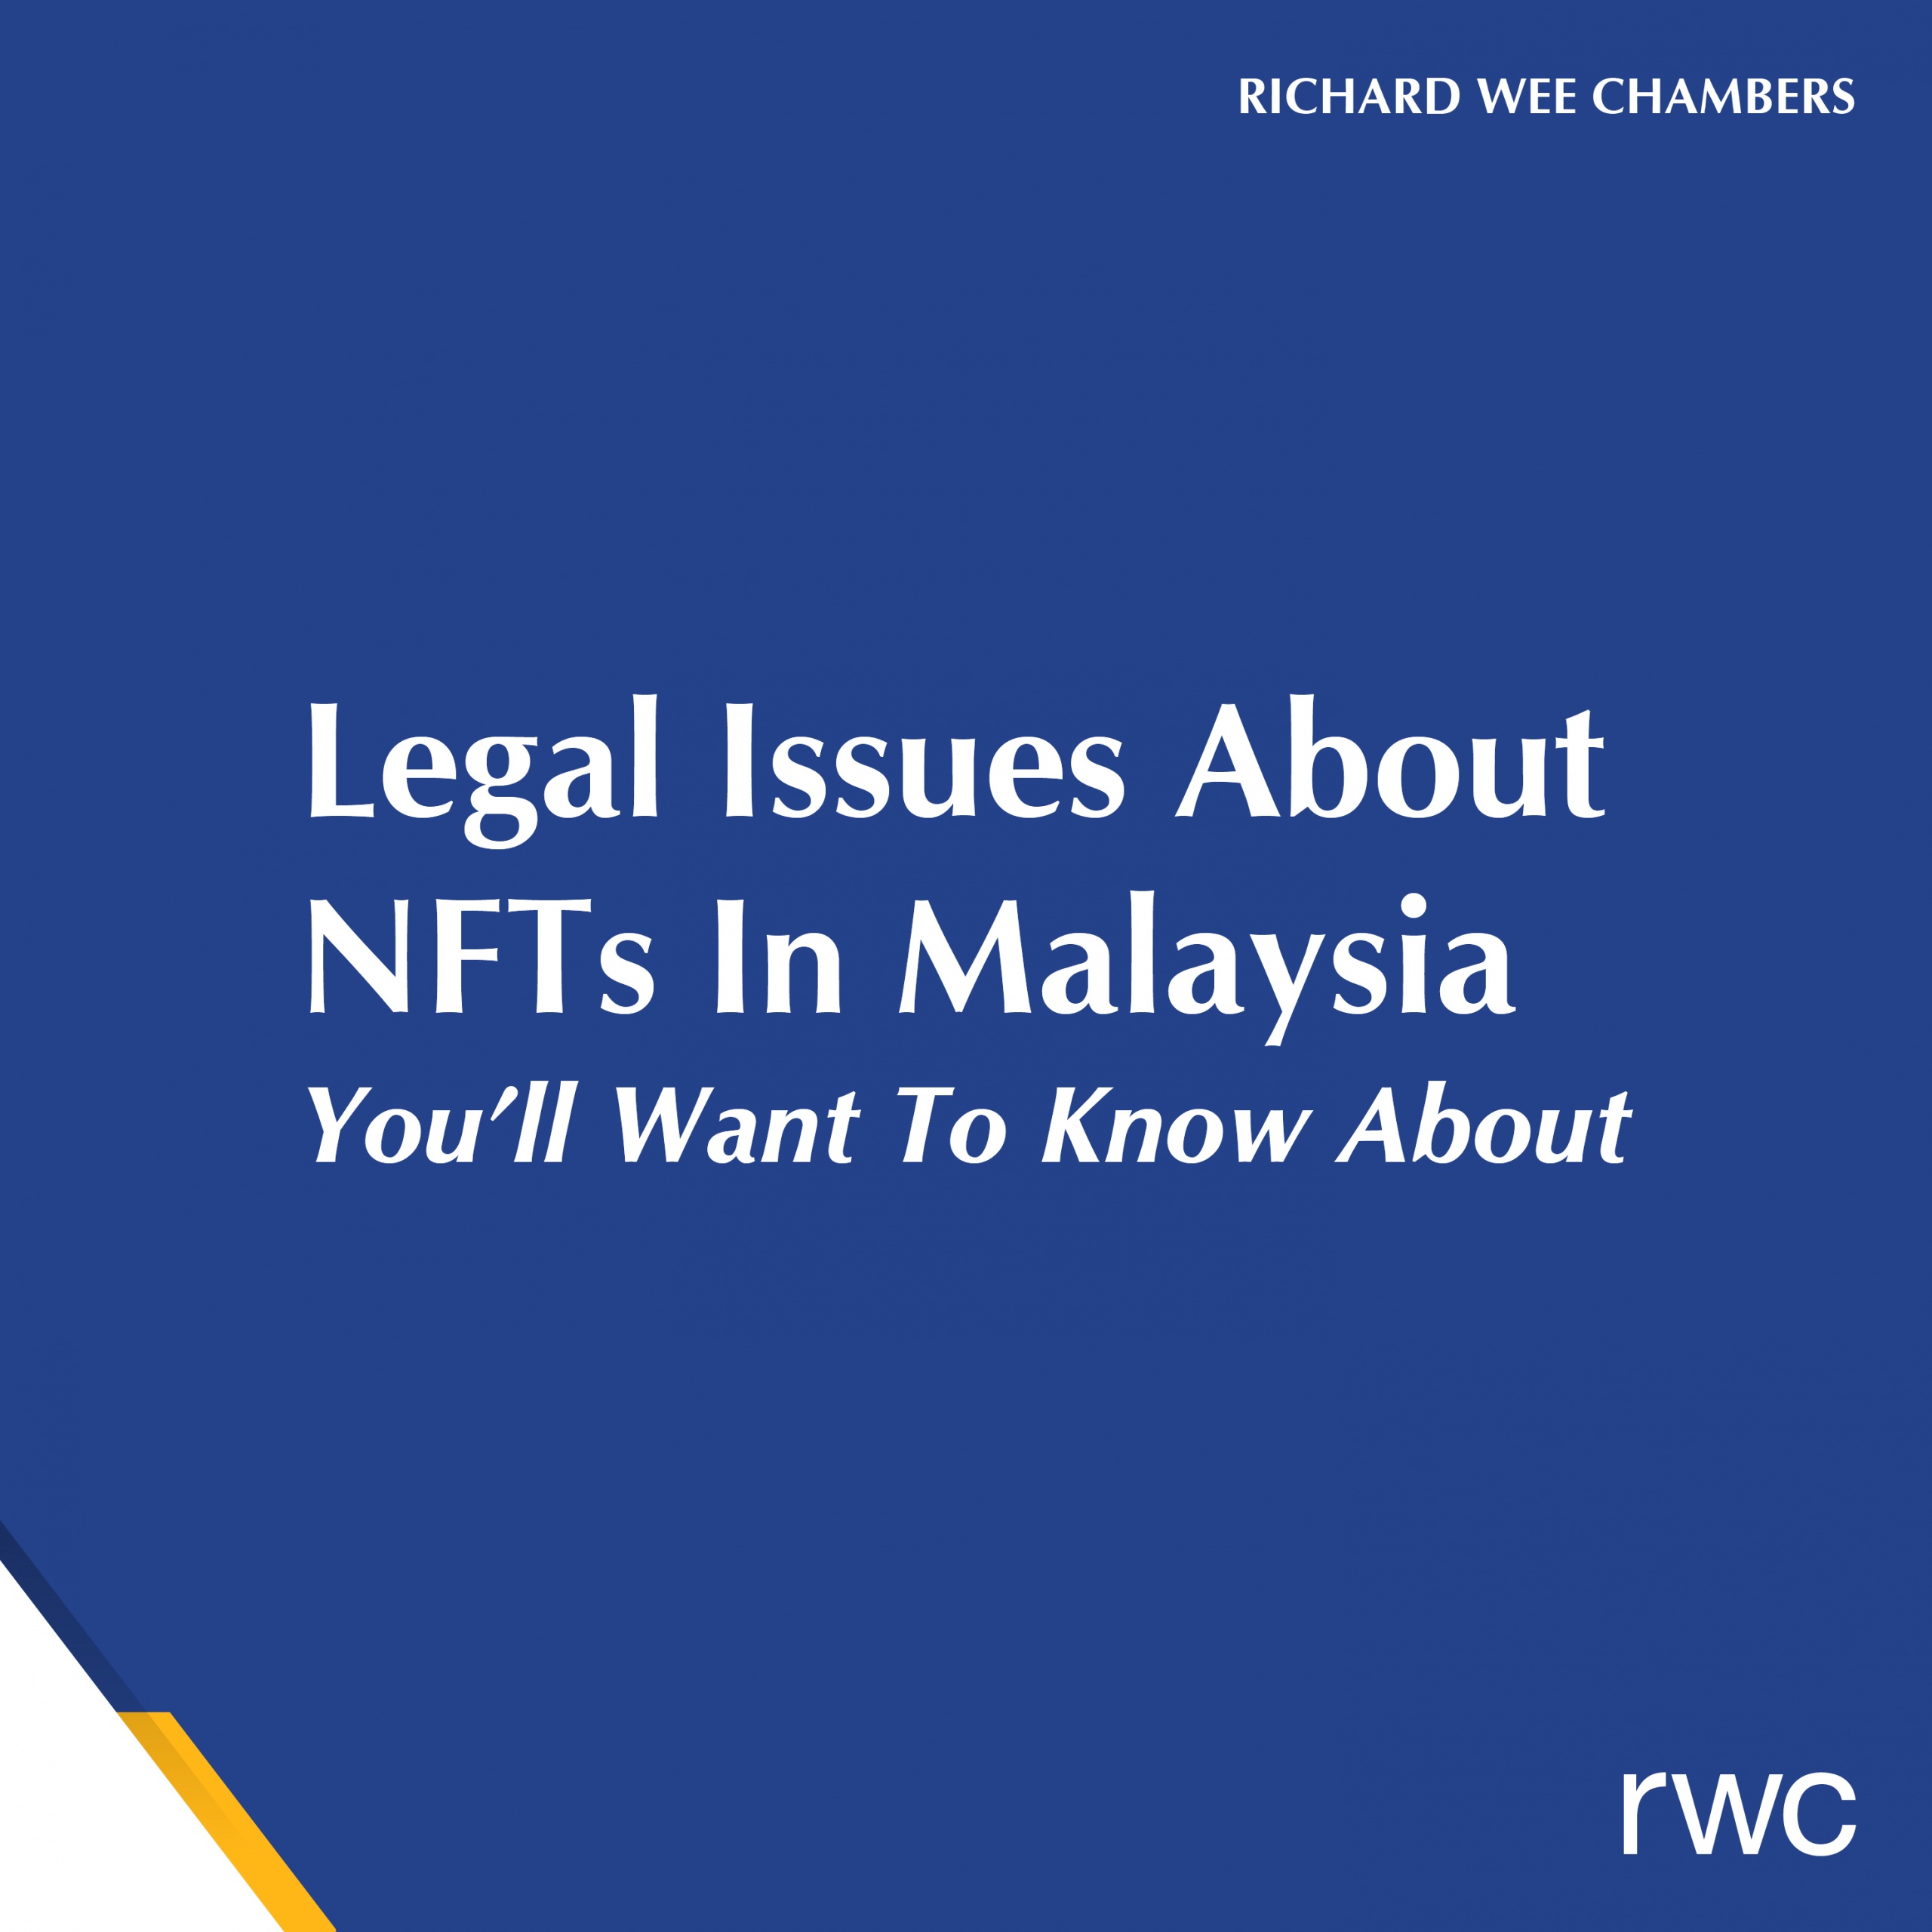 Legal Issues About NFTs In Malaysia - Richard Wee Chambers